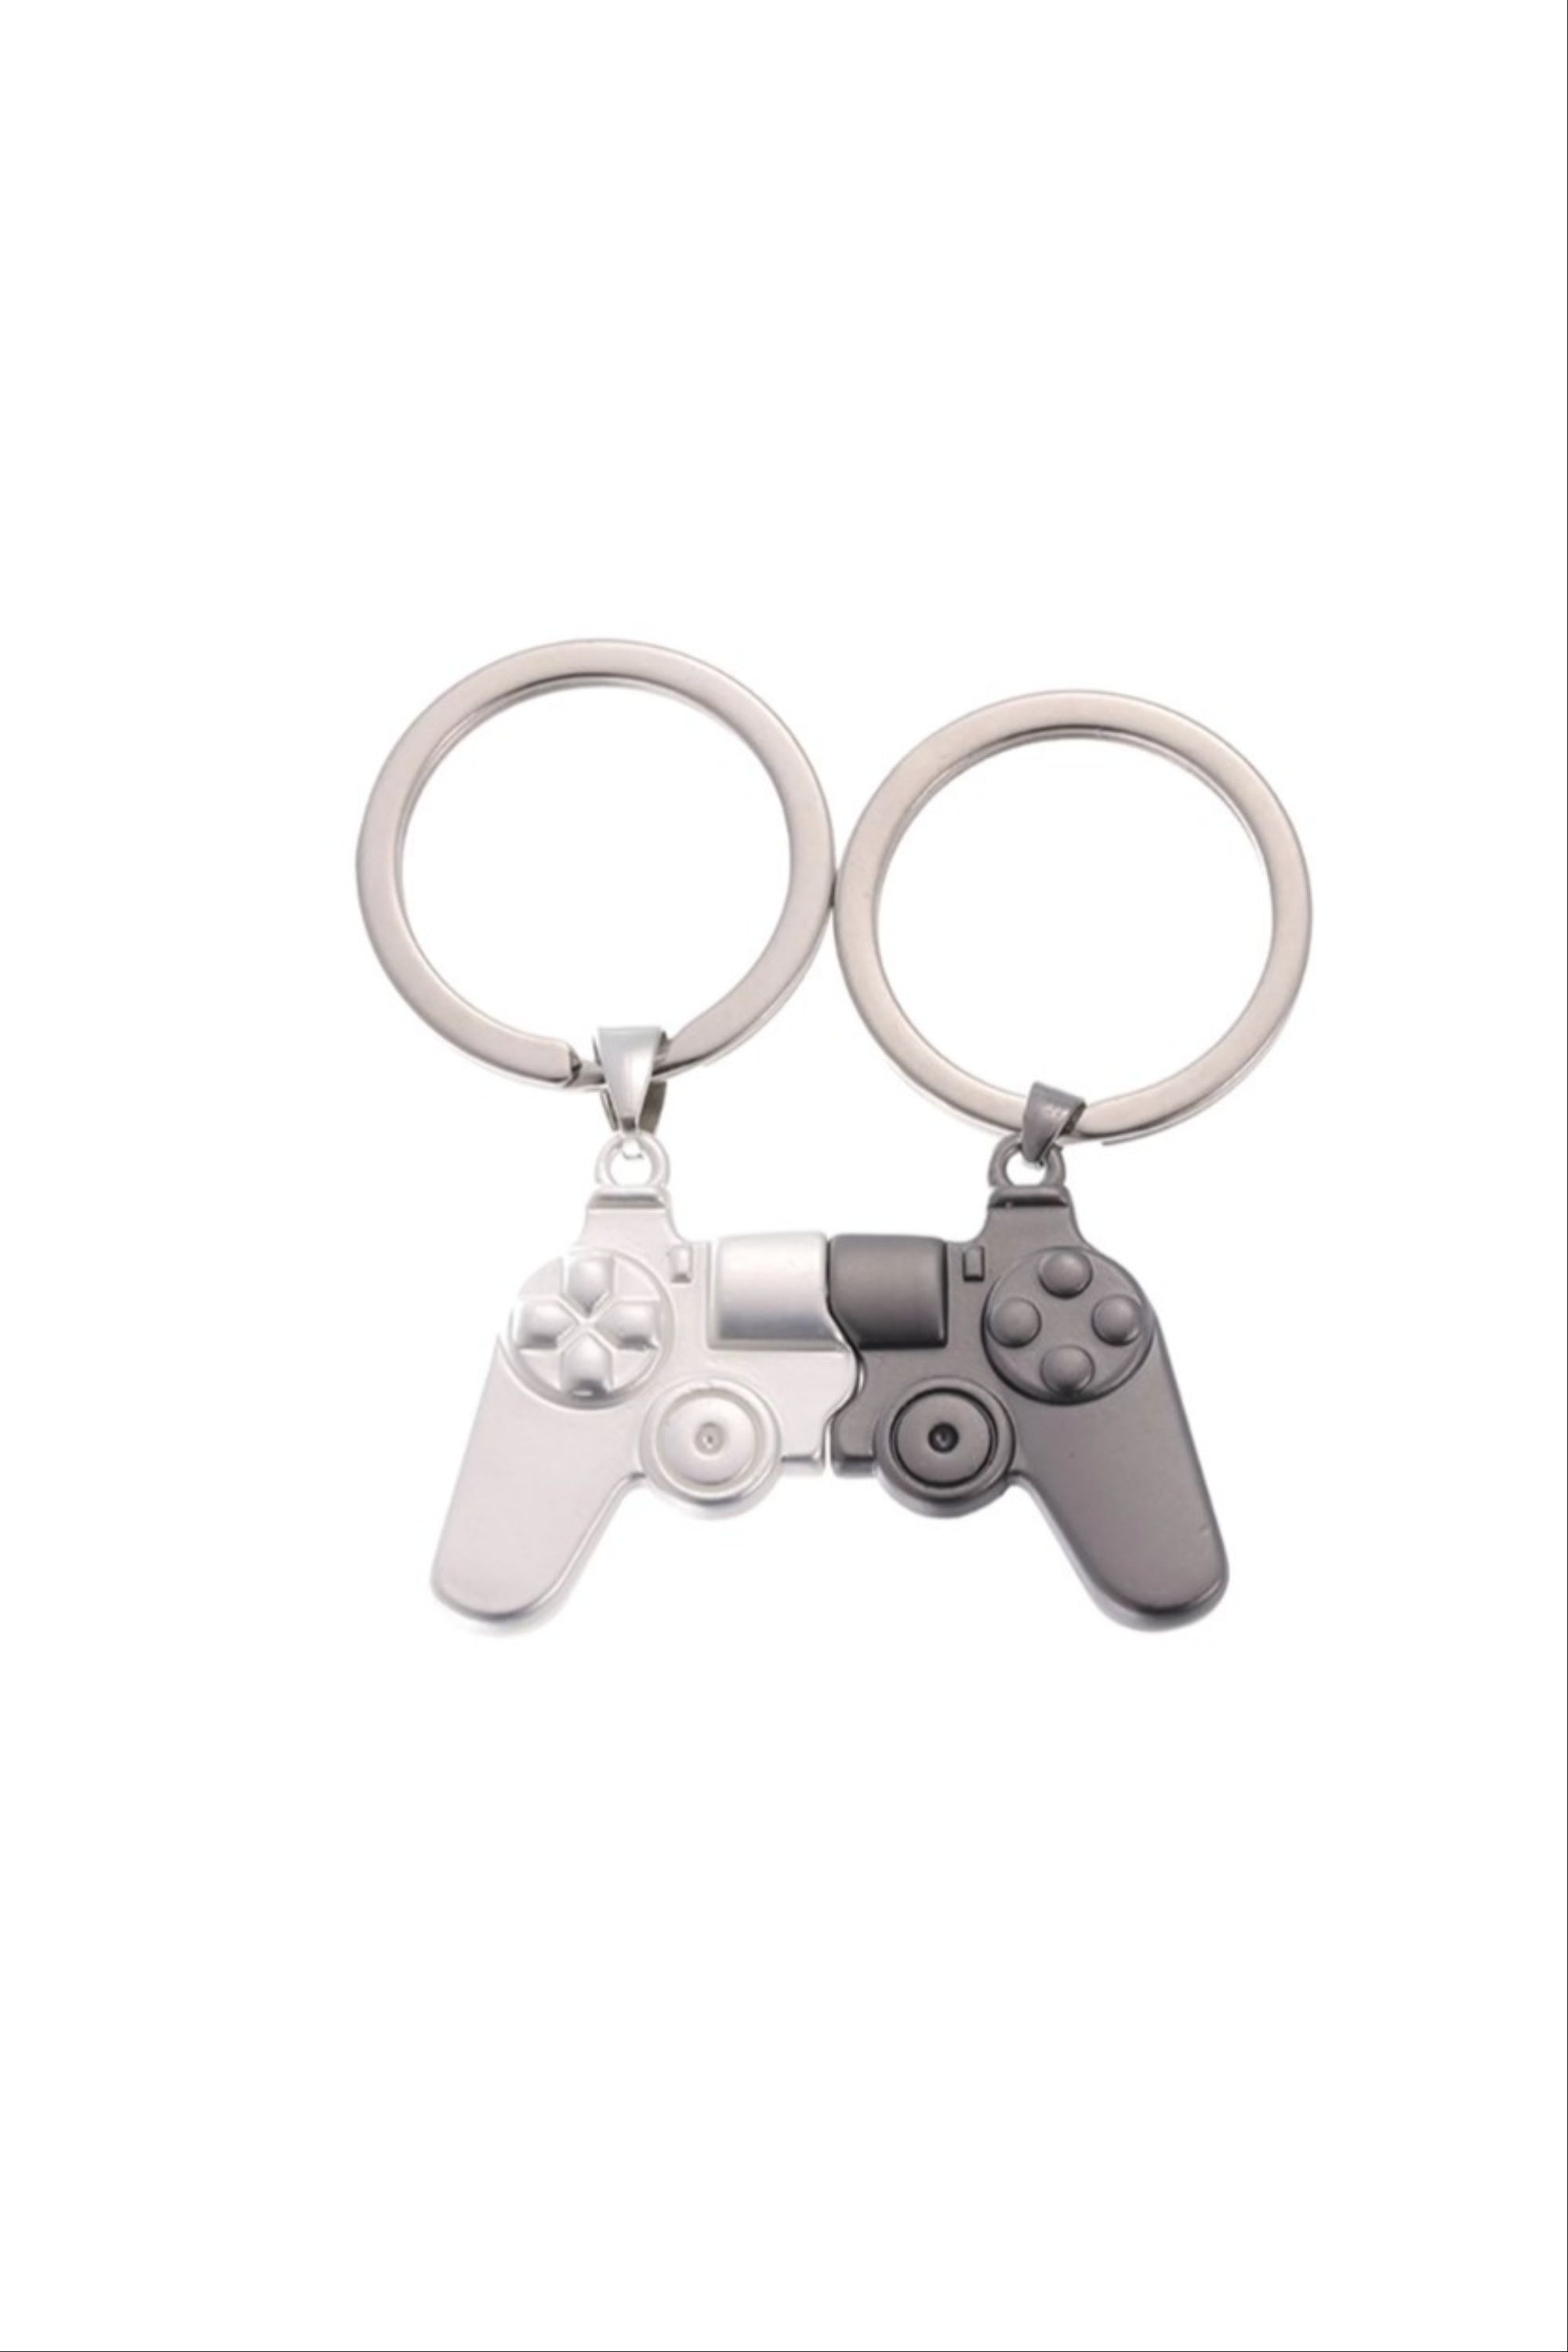 Matching Controller Keychain